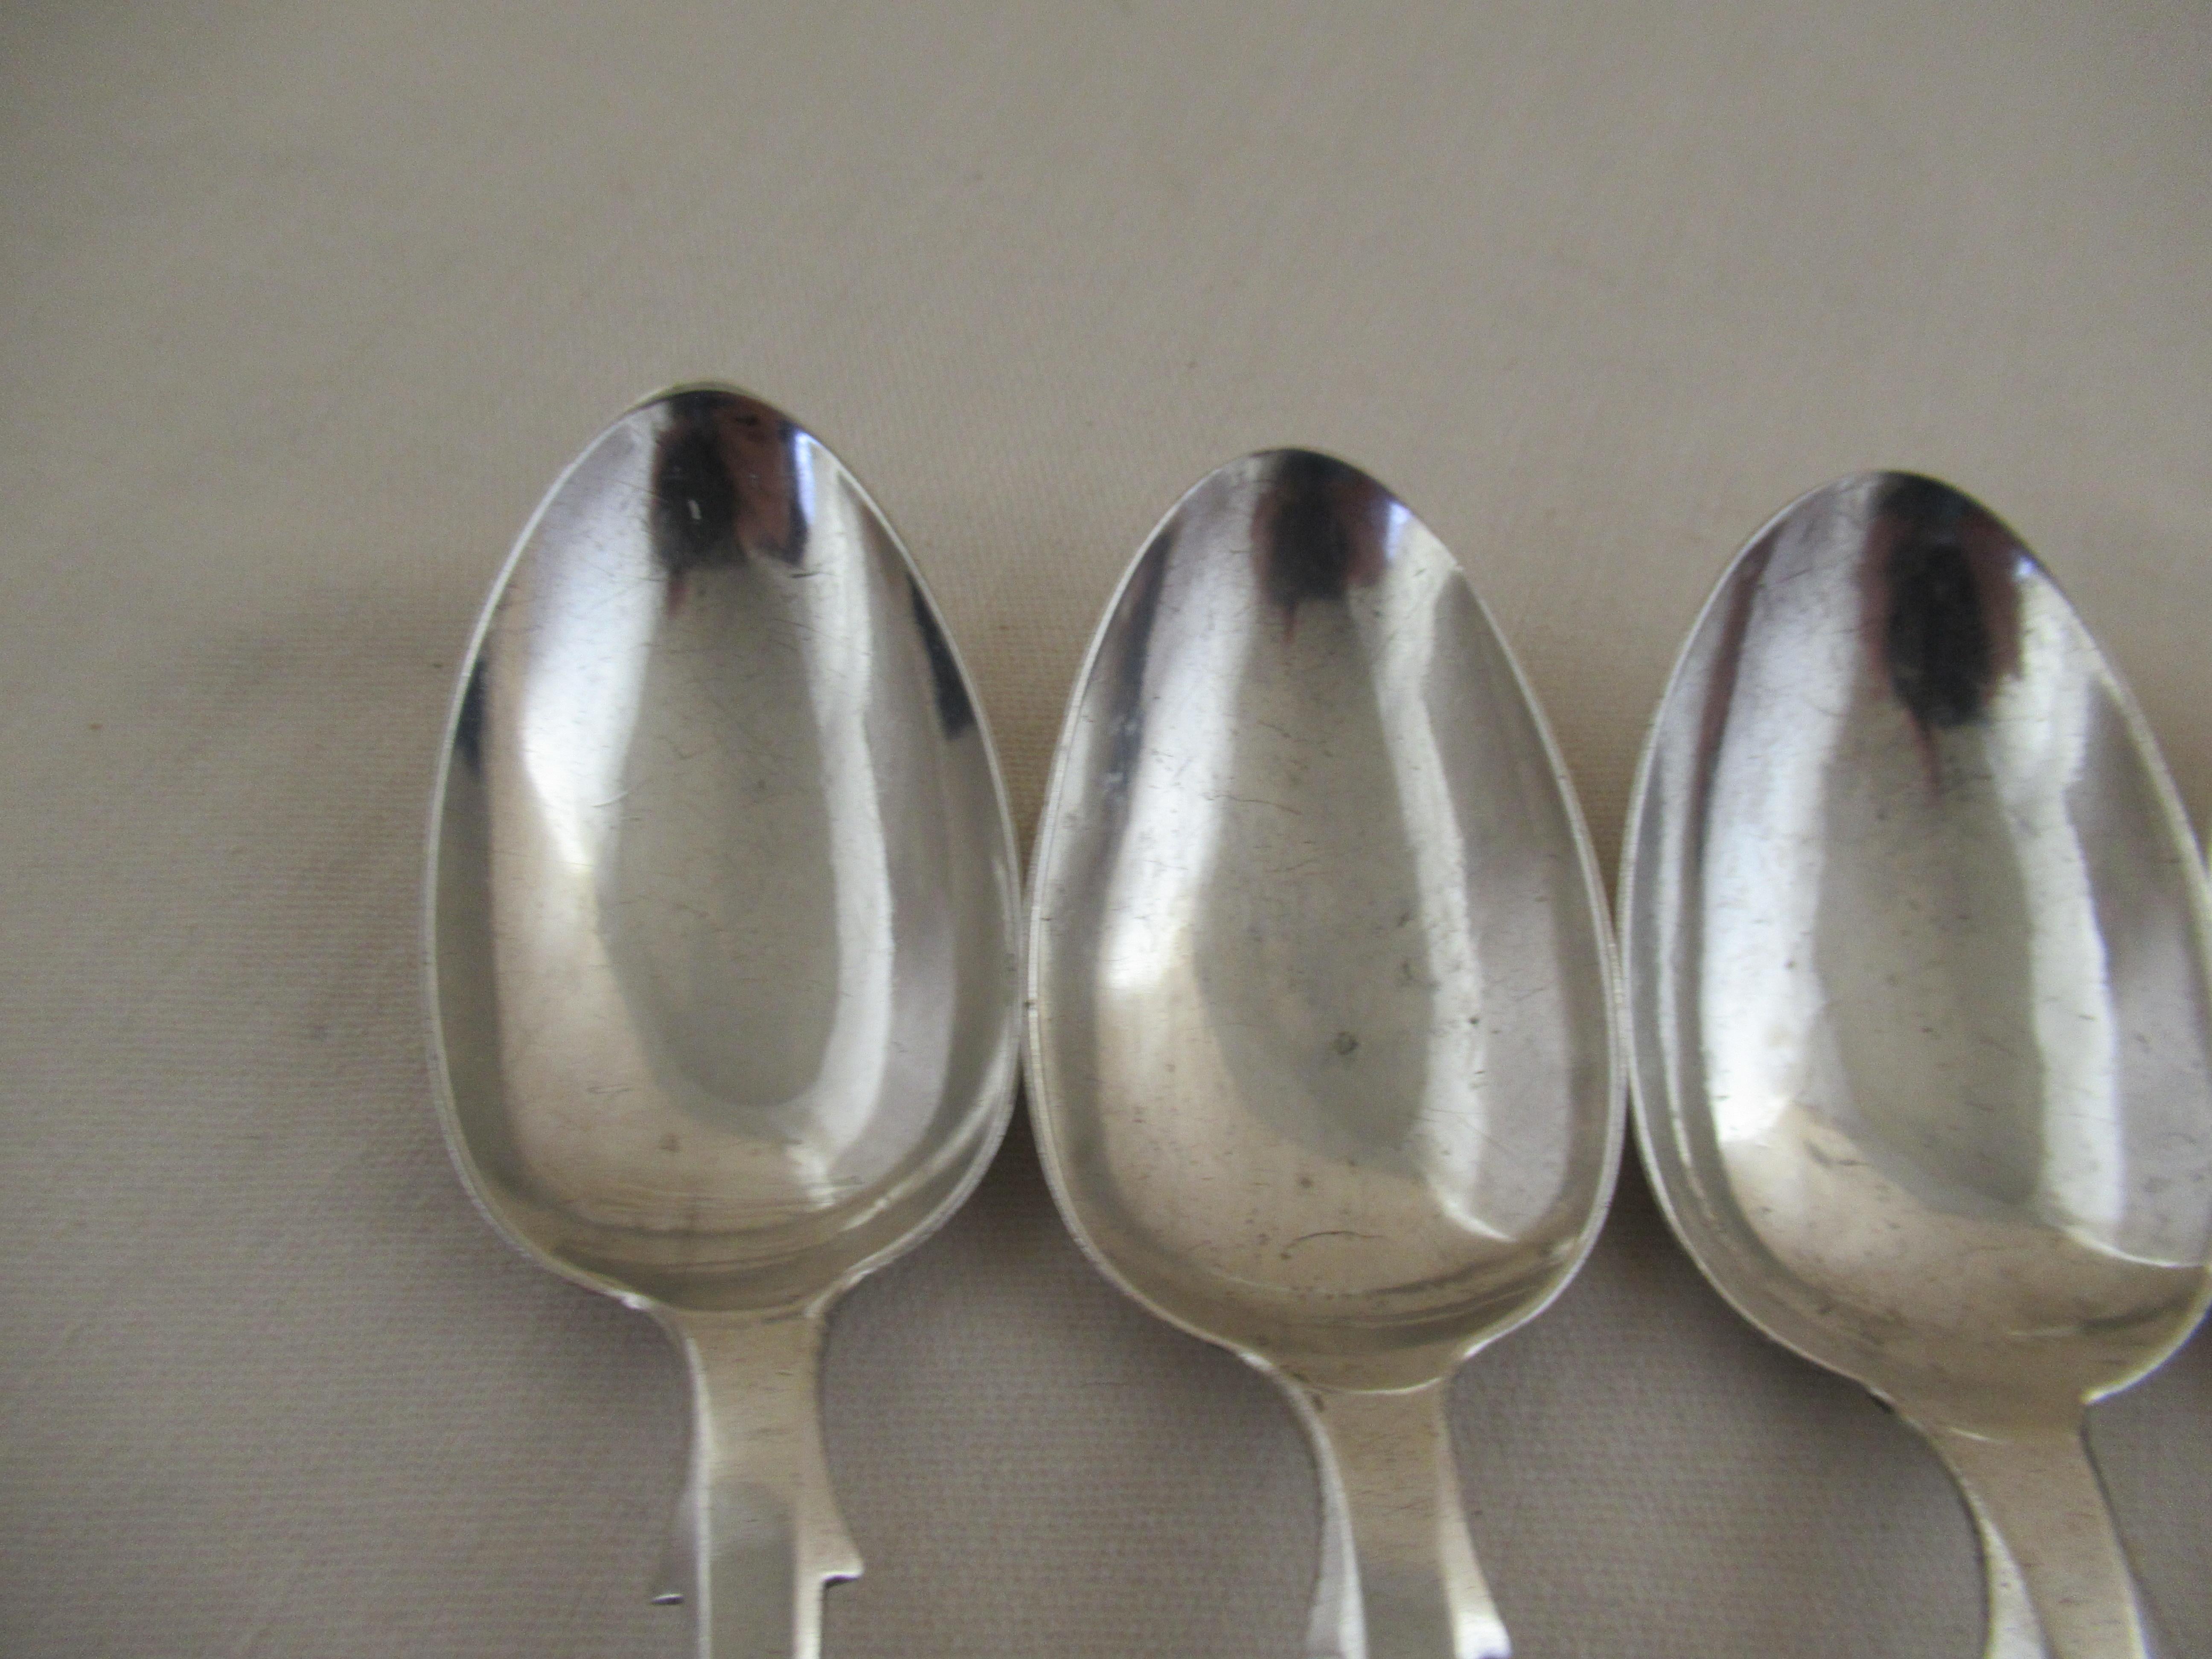 Sterling silver - set of 5 - large kings pattern teaspoons
The hallmarks show that they were made in Edinburgh, Scotland, by
 Millidge & Son.
The hallmarks were applied by the Edinburgh Assay Office:-
Castle & Thistle - Edinburgh Assay Office